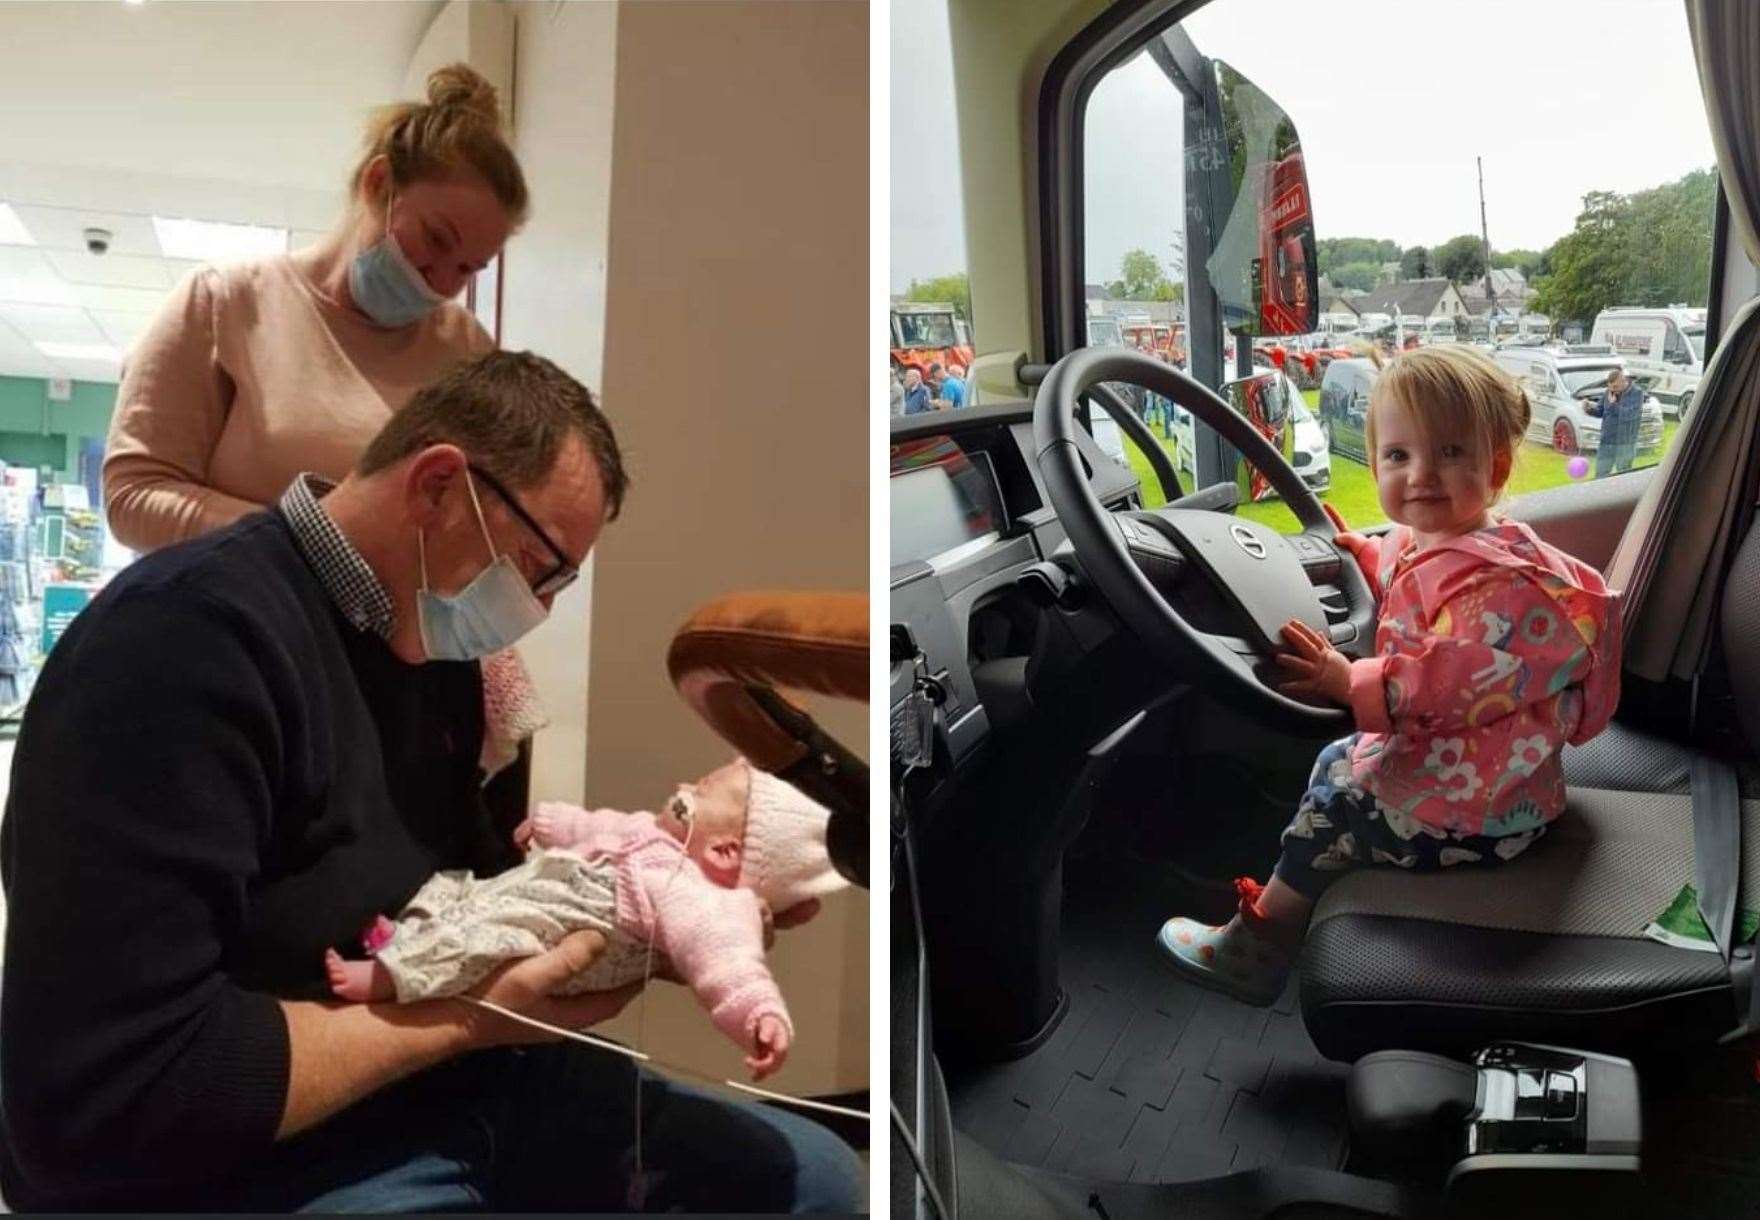 Right: Baby Rosie with her mother Shelly and grandfather Charley. Right: Rosie at the wheel of the truck